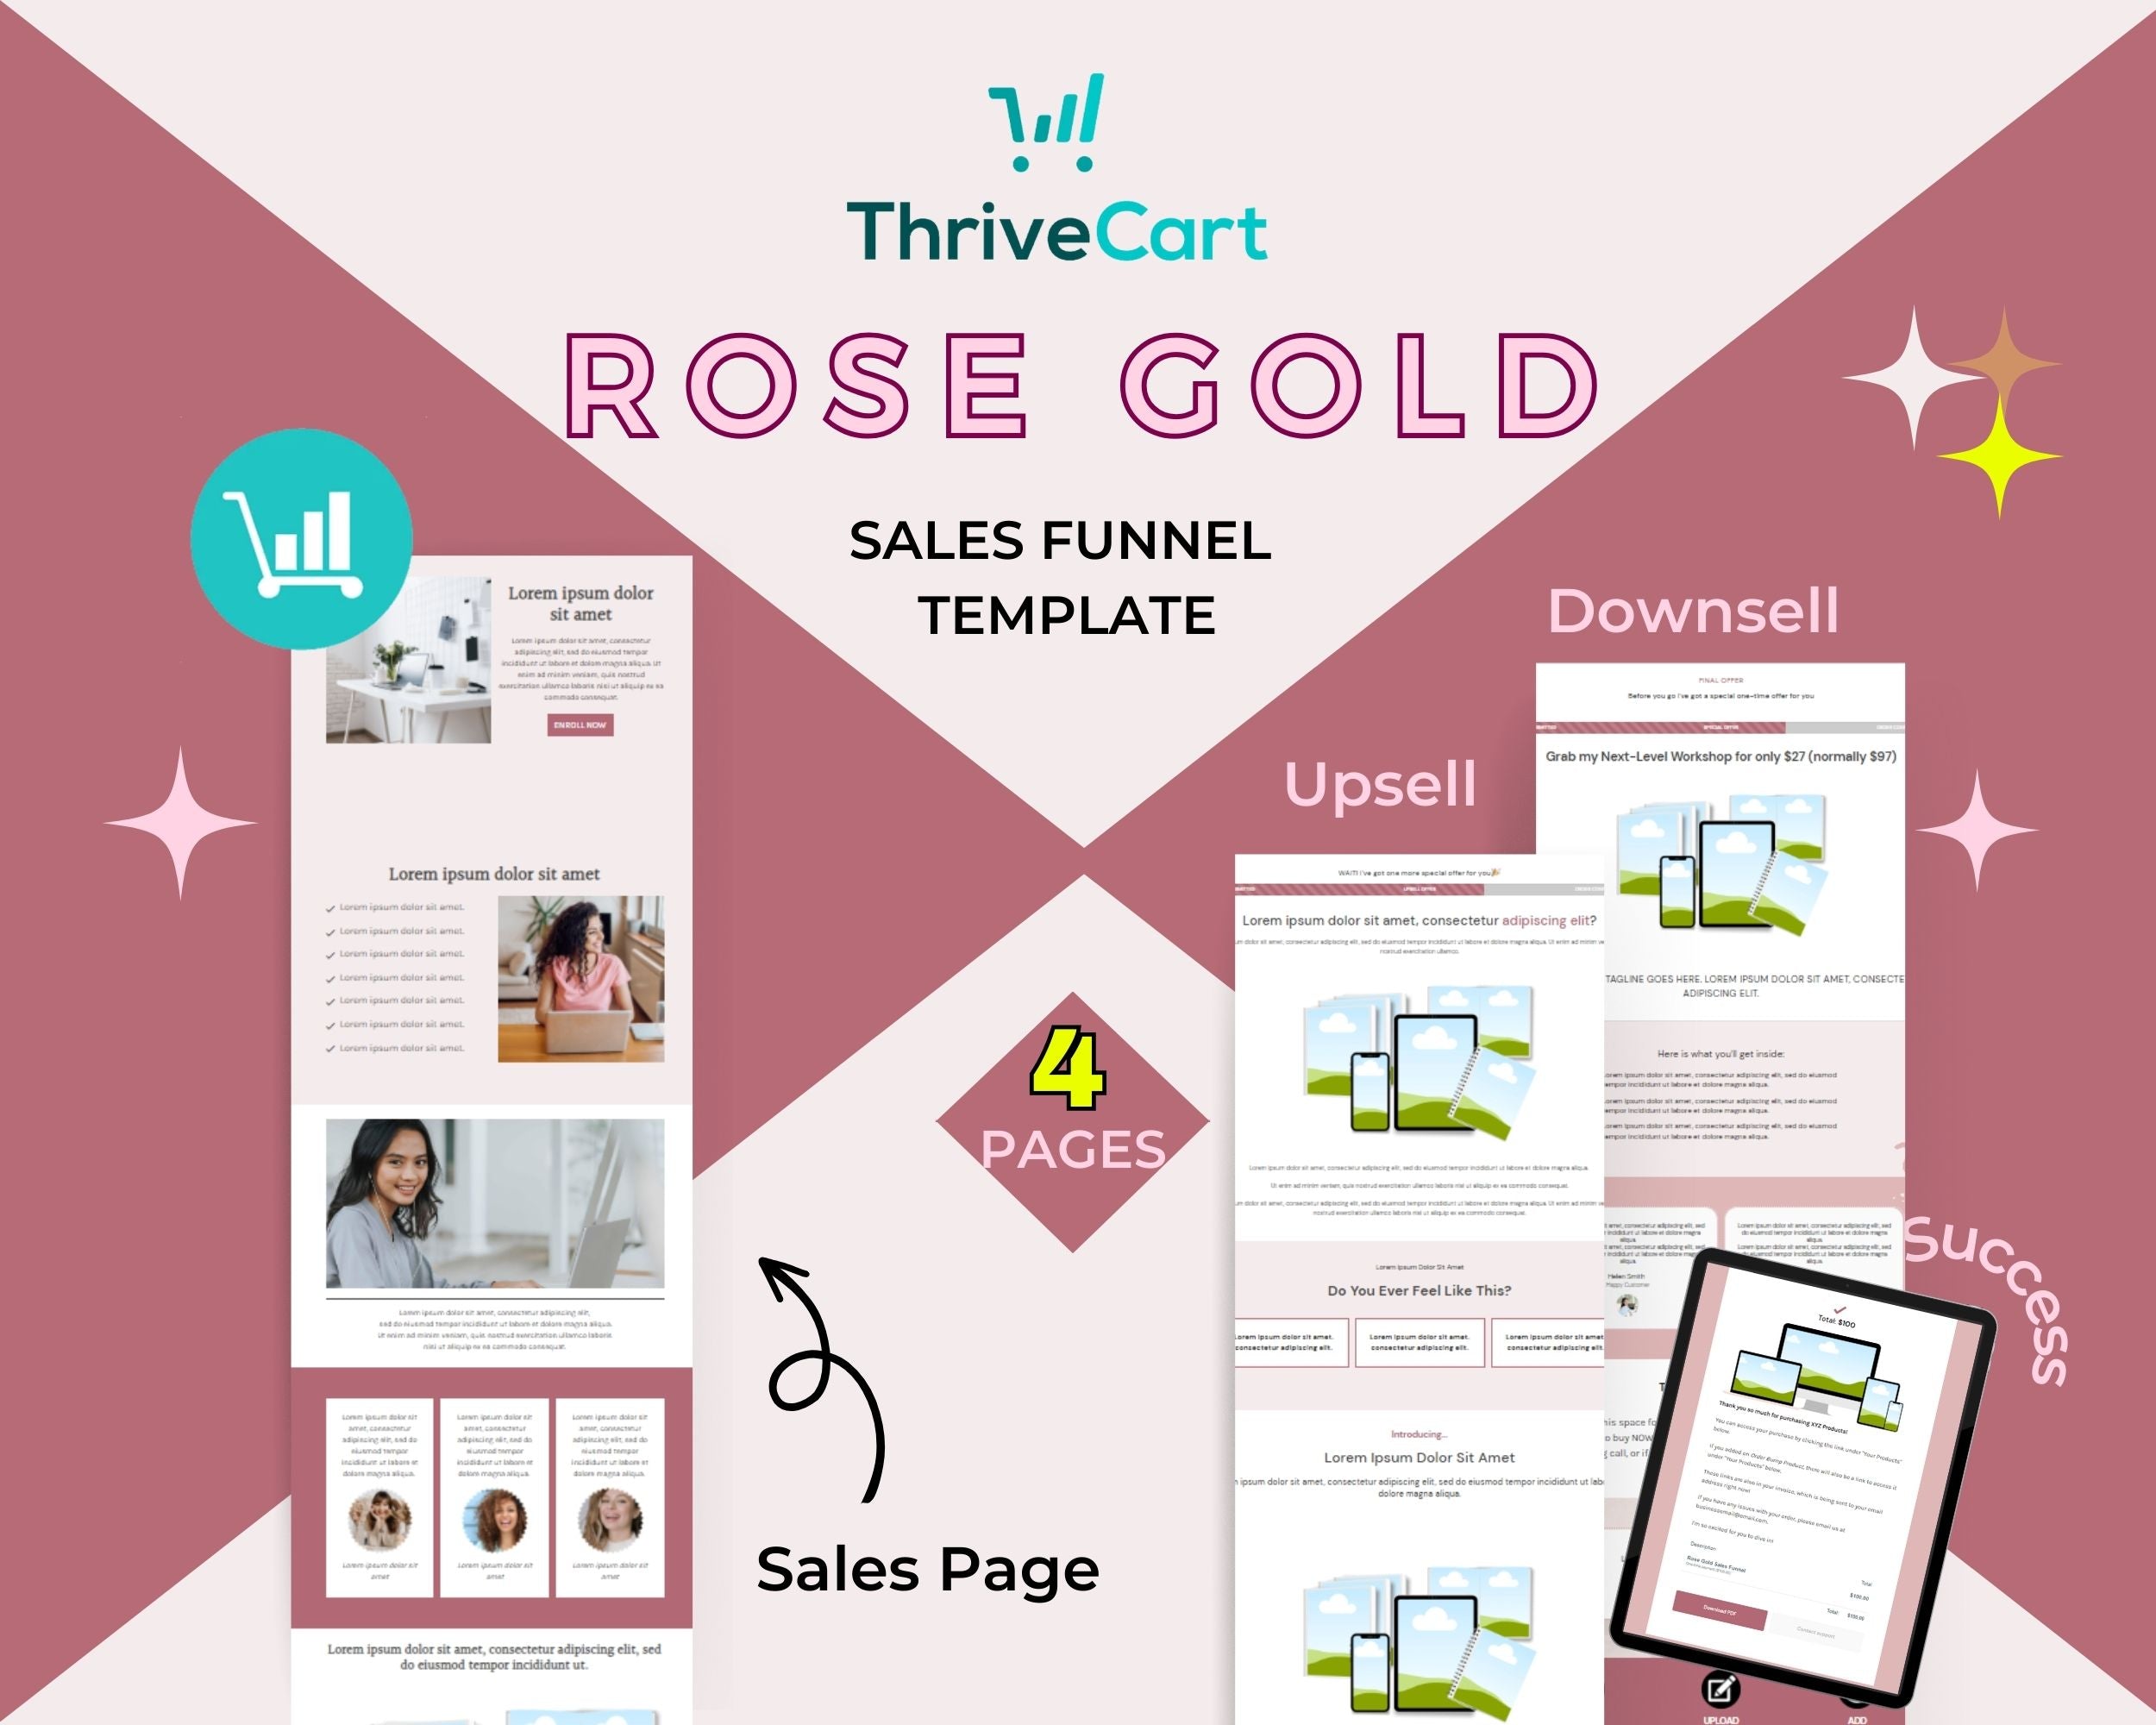 Rose Gold ThriveCart 4-Page Sales Funnel Template